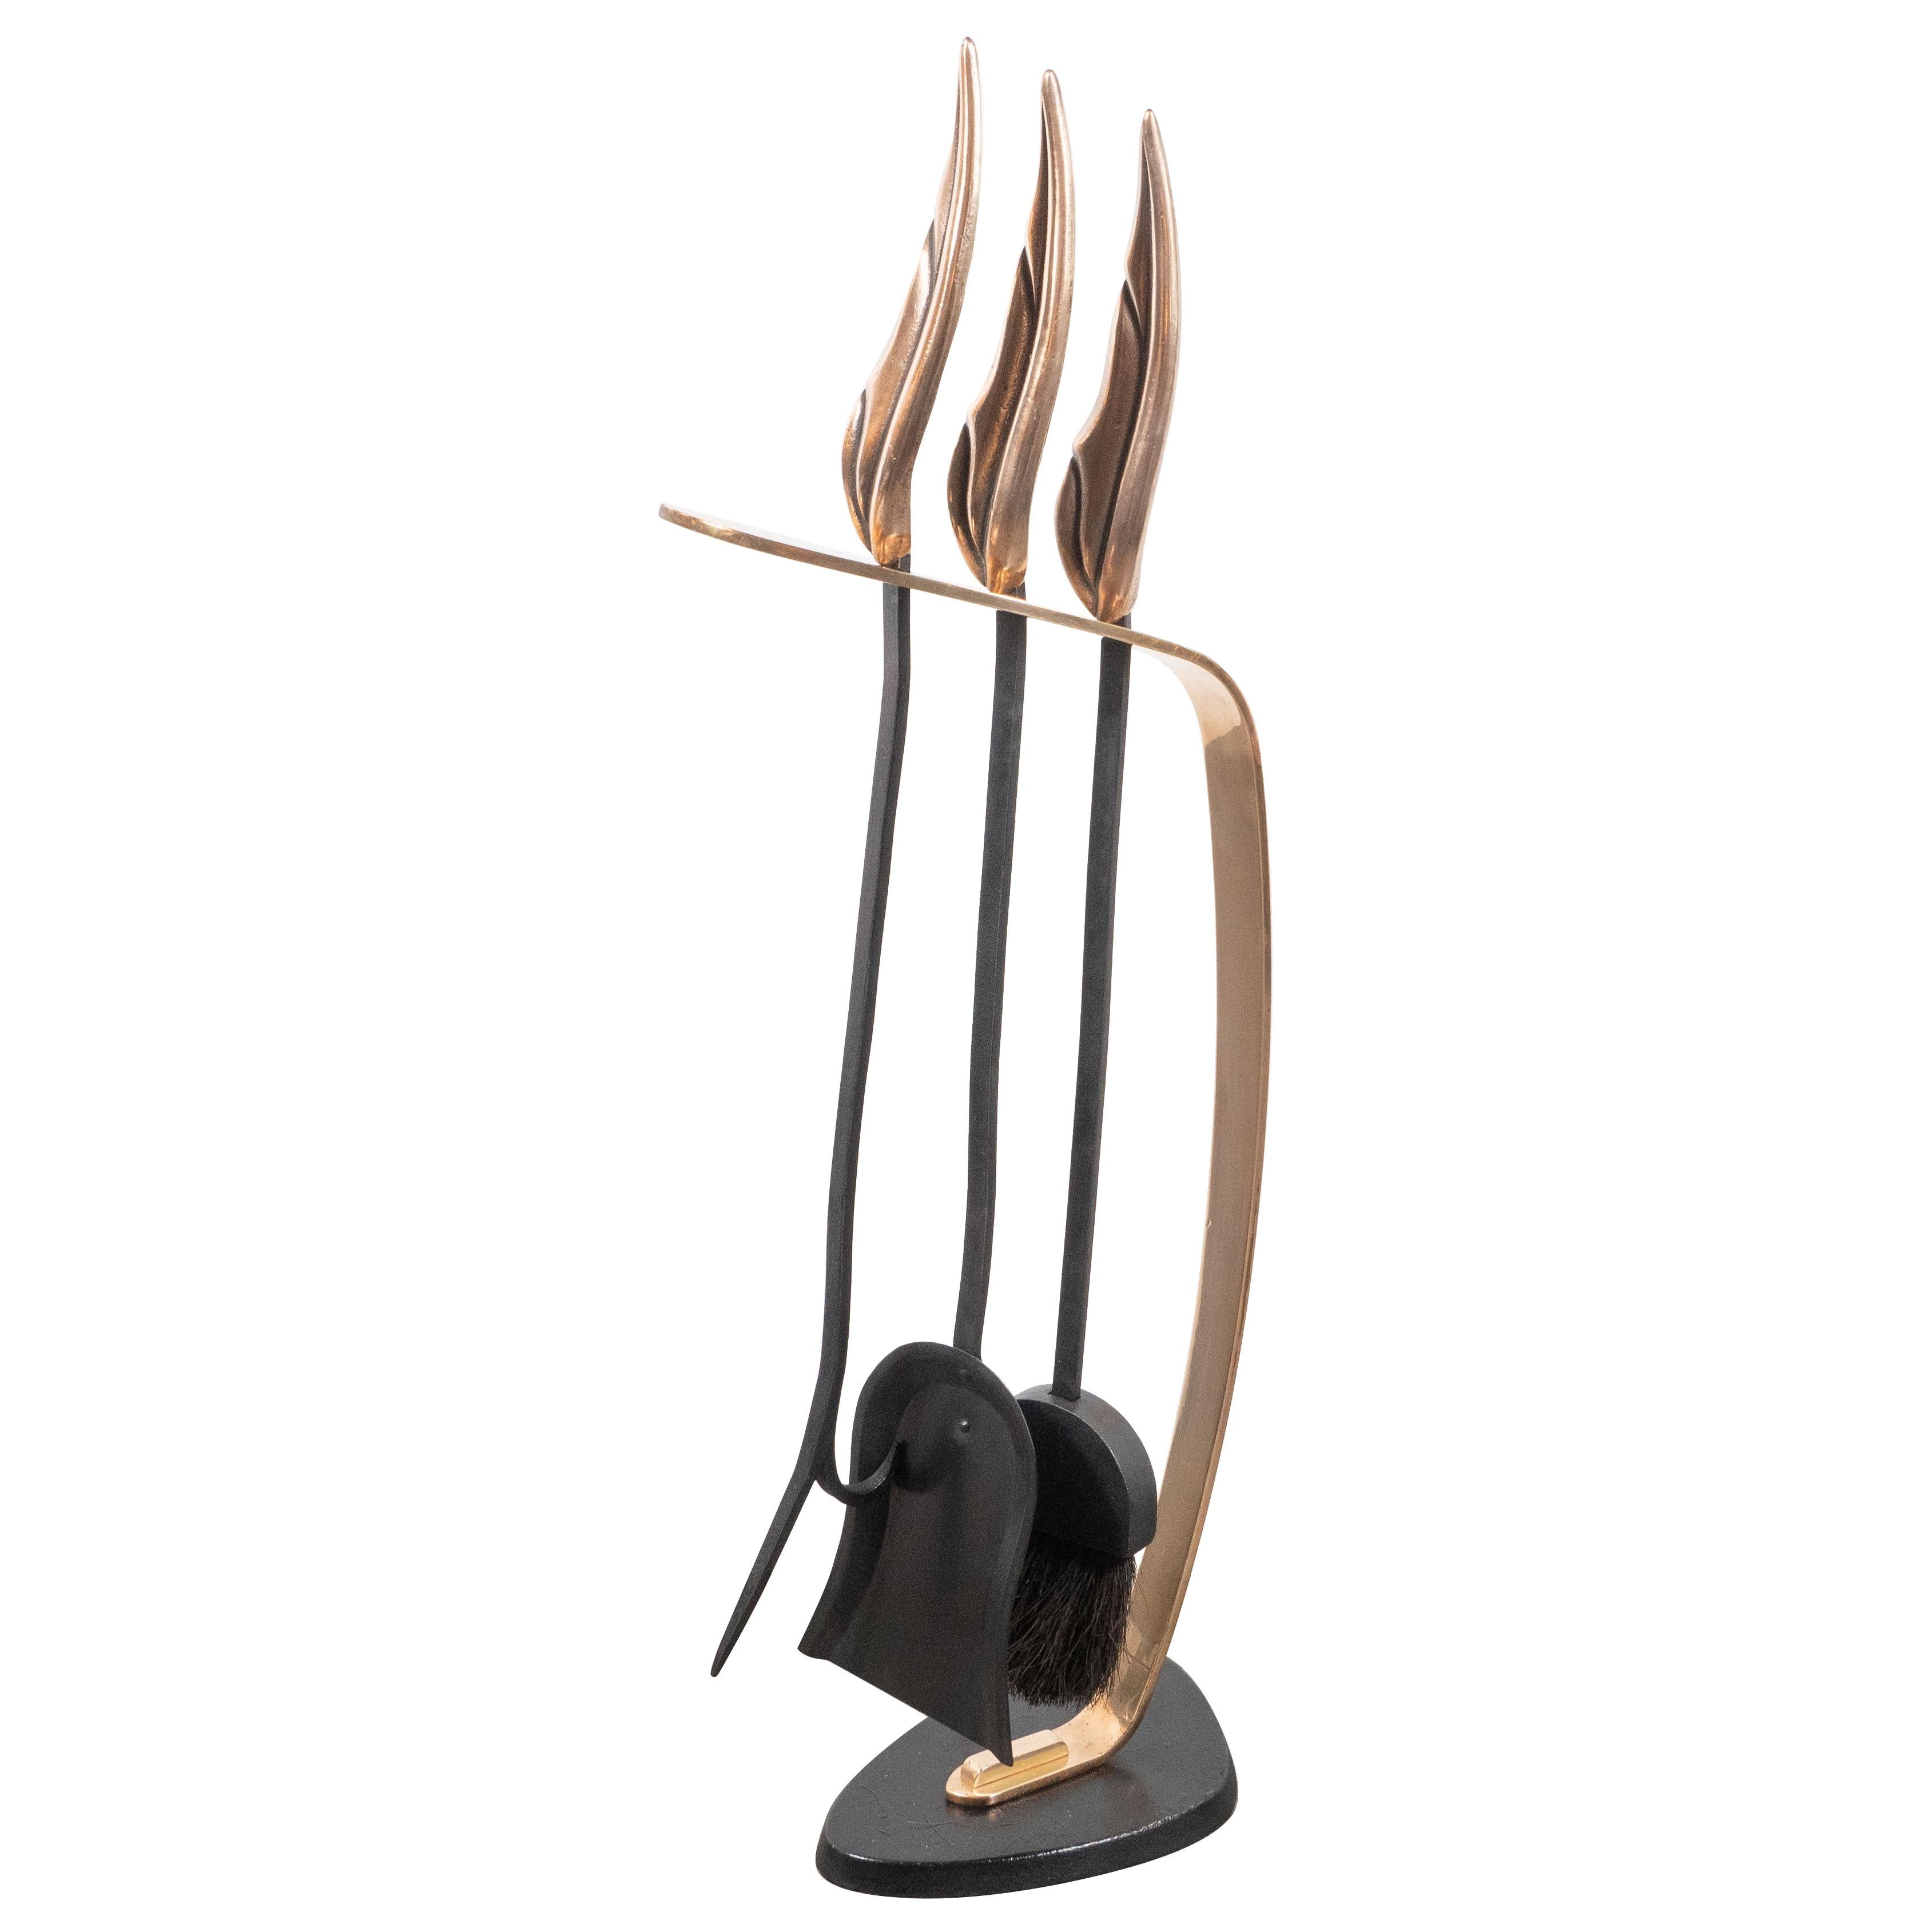 This stunning and dramatic Mid-Century Modern four piece fire tool set was realized in the United States, circa 1950. A cantilevered bronze support ascends from an amorphic shield form black enamel base that holds three tools (a poker, brush and